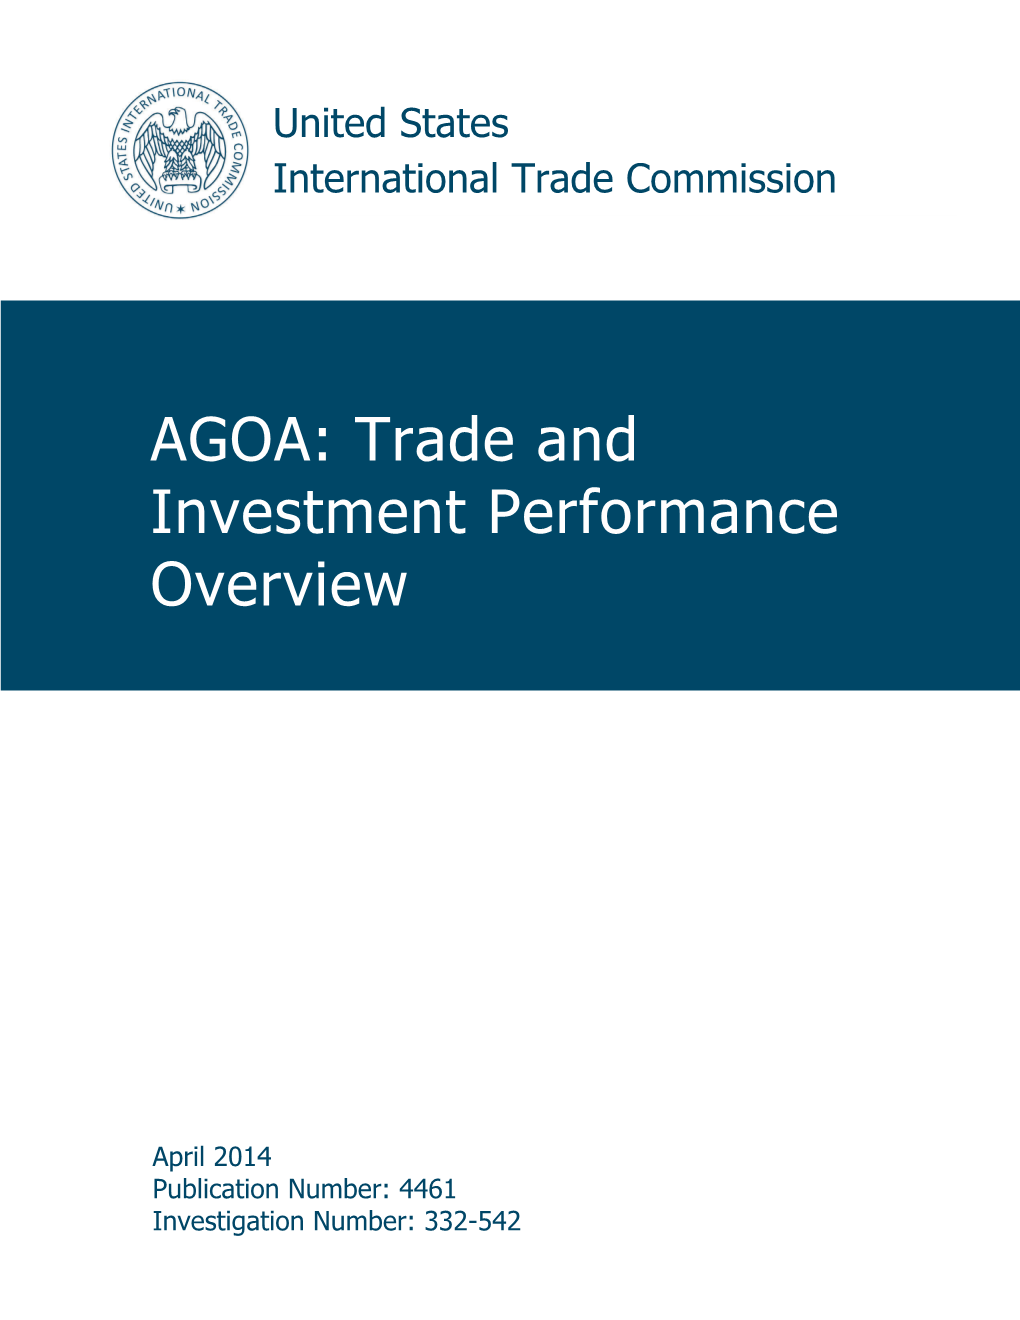 AGOA: Trade and Investment Performance Overview